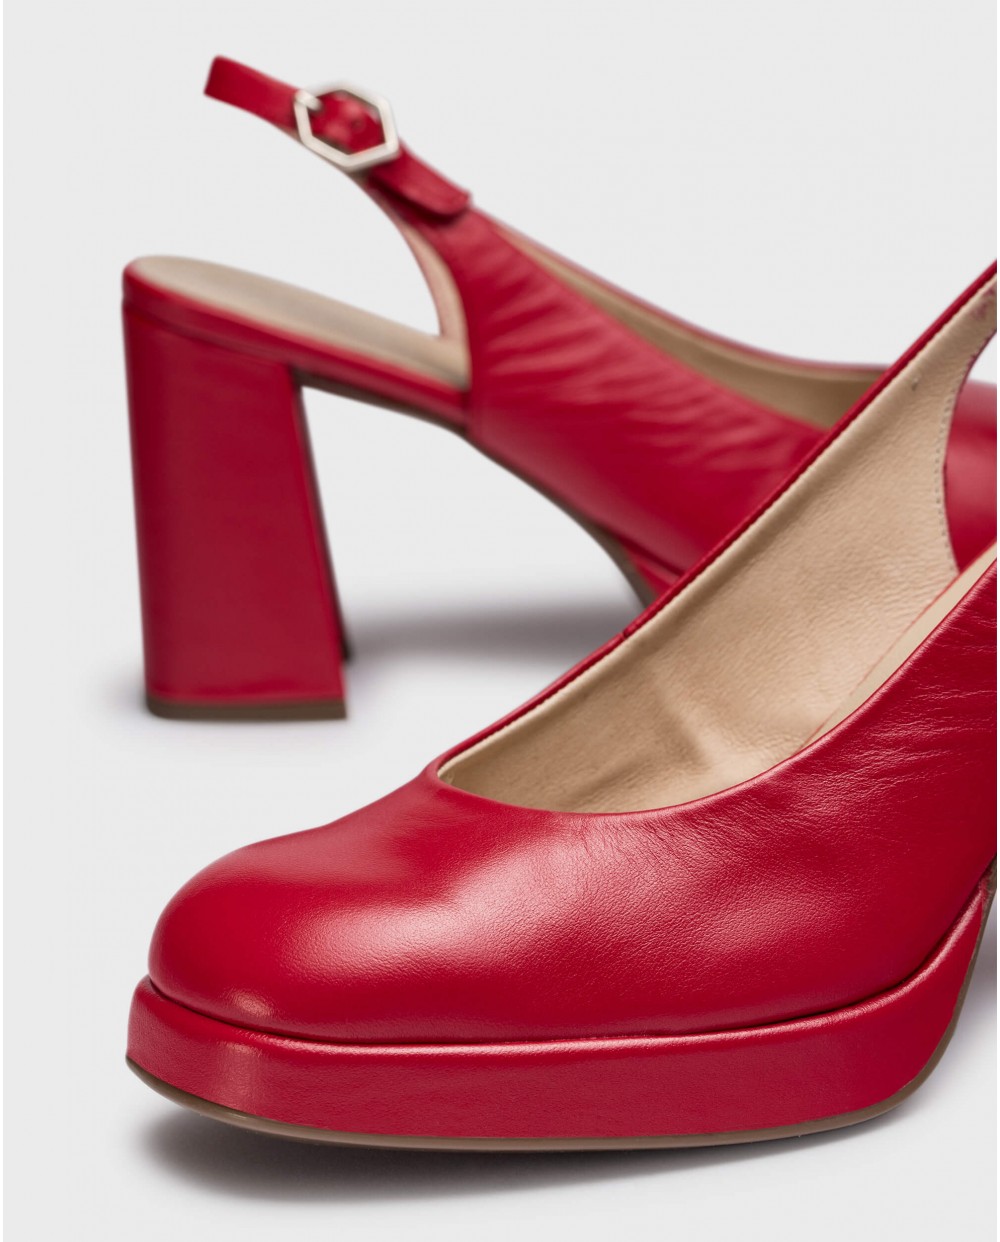 Red VALERY shoe